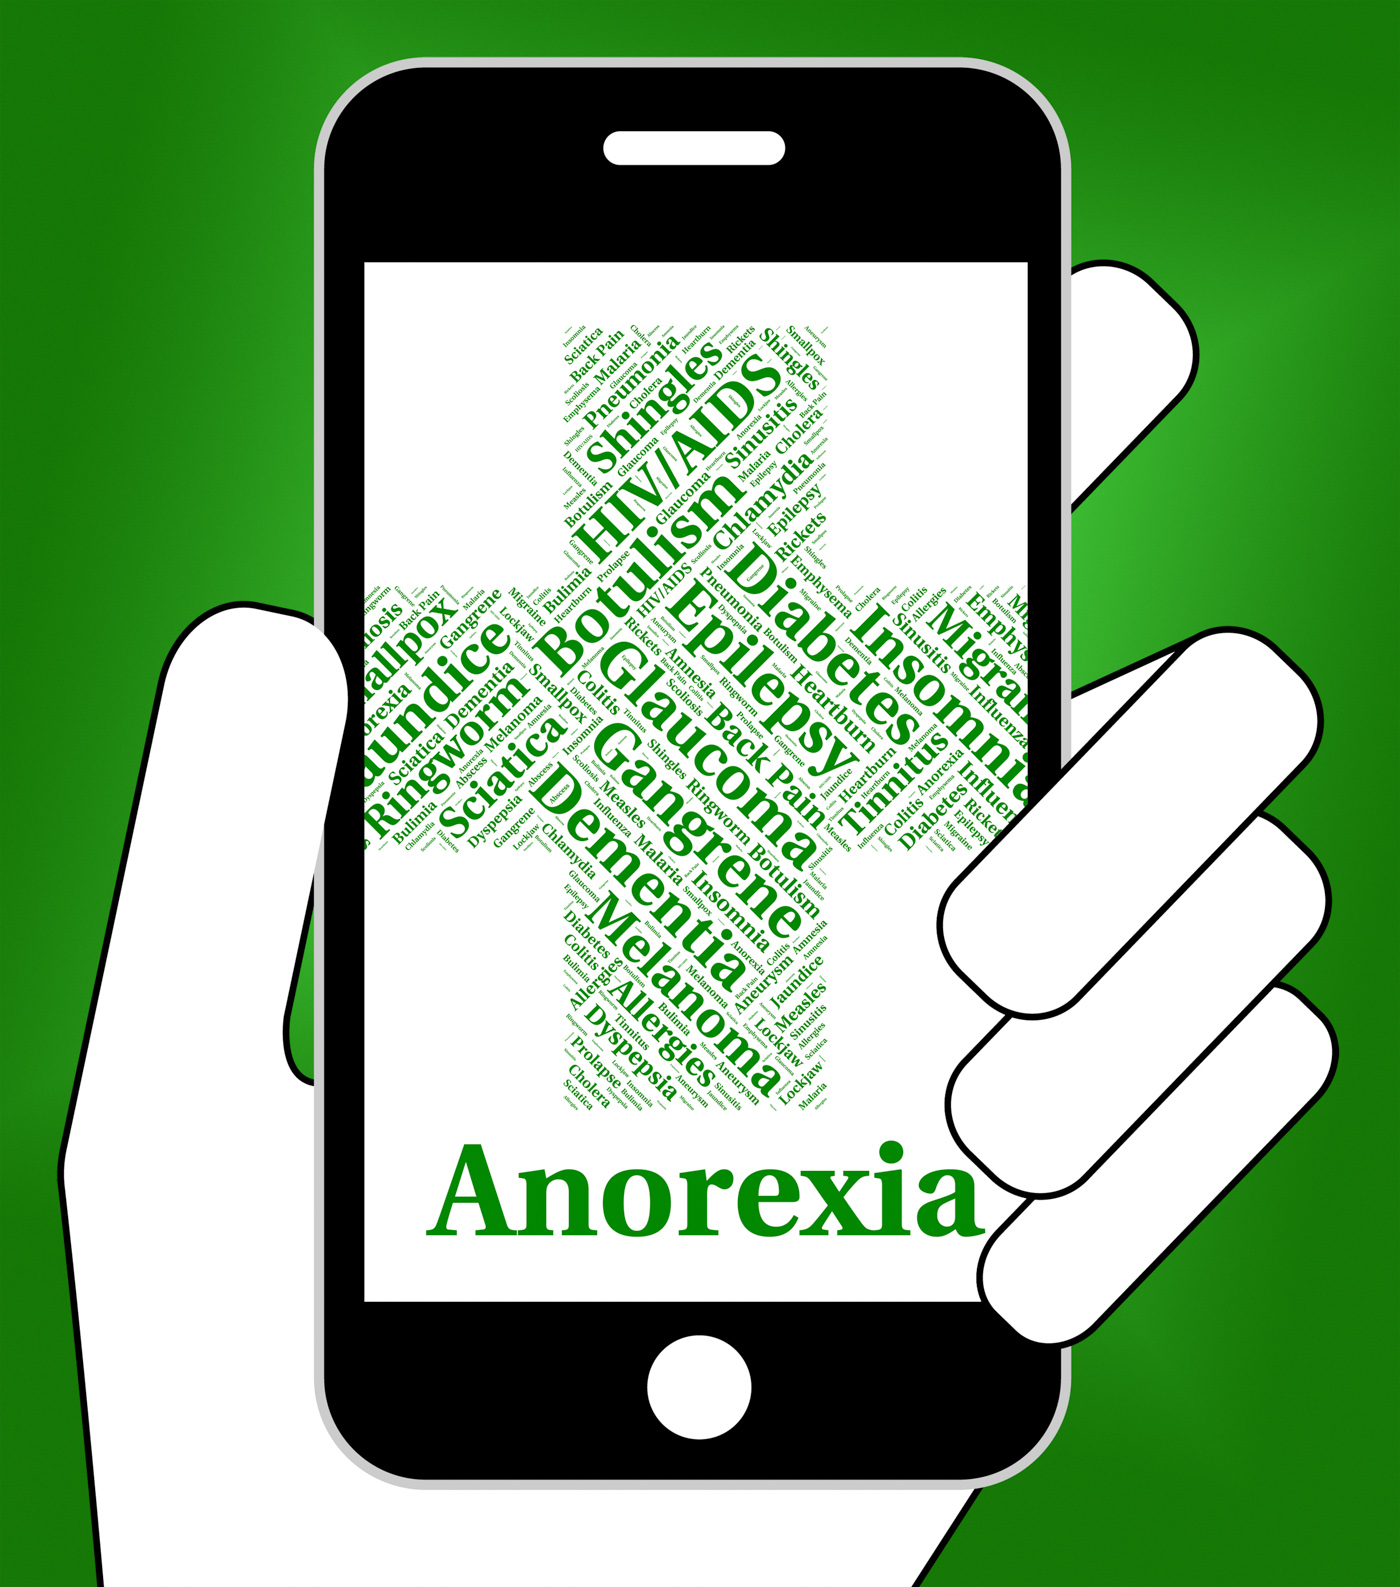 Anorexia illness represents poor health and ailment photo